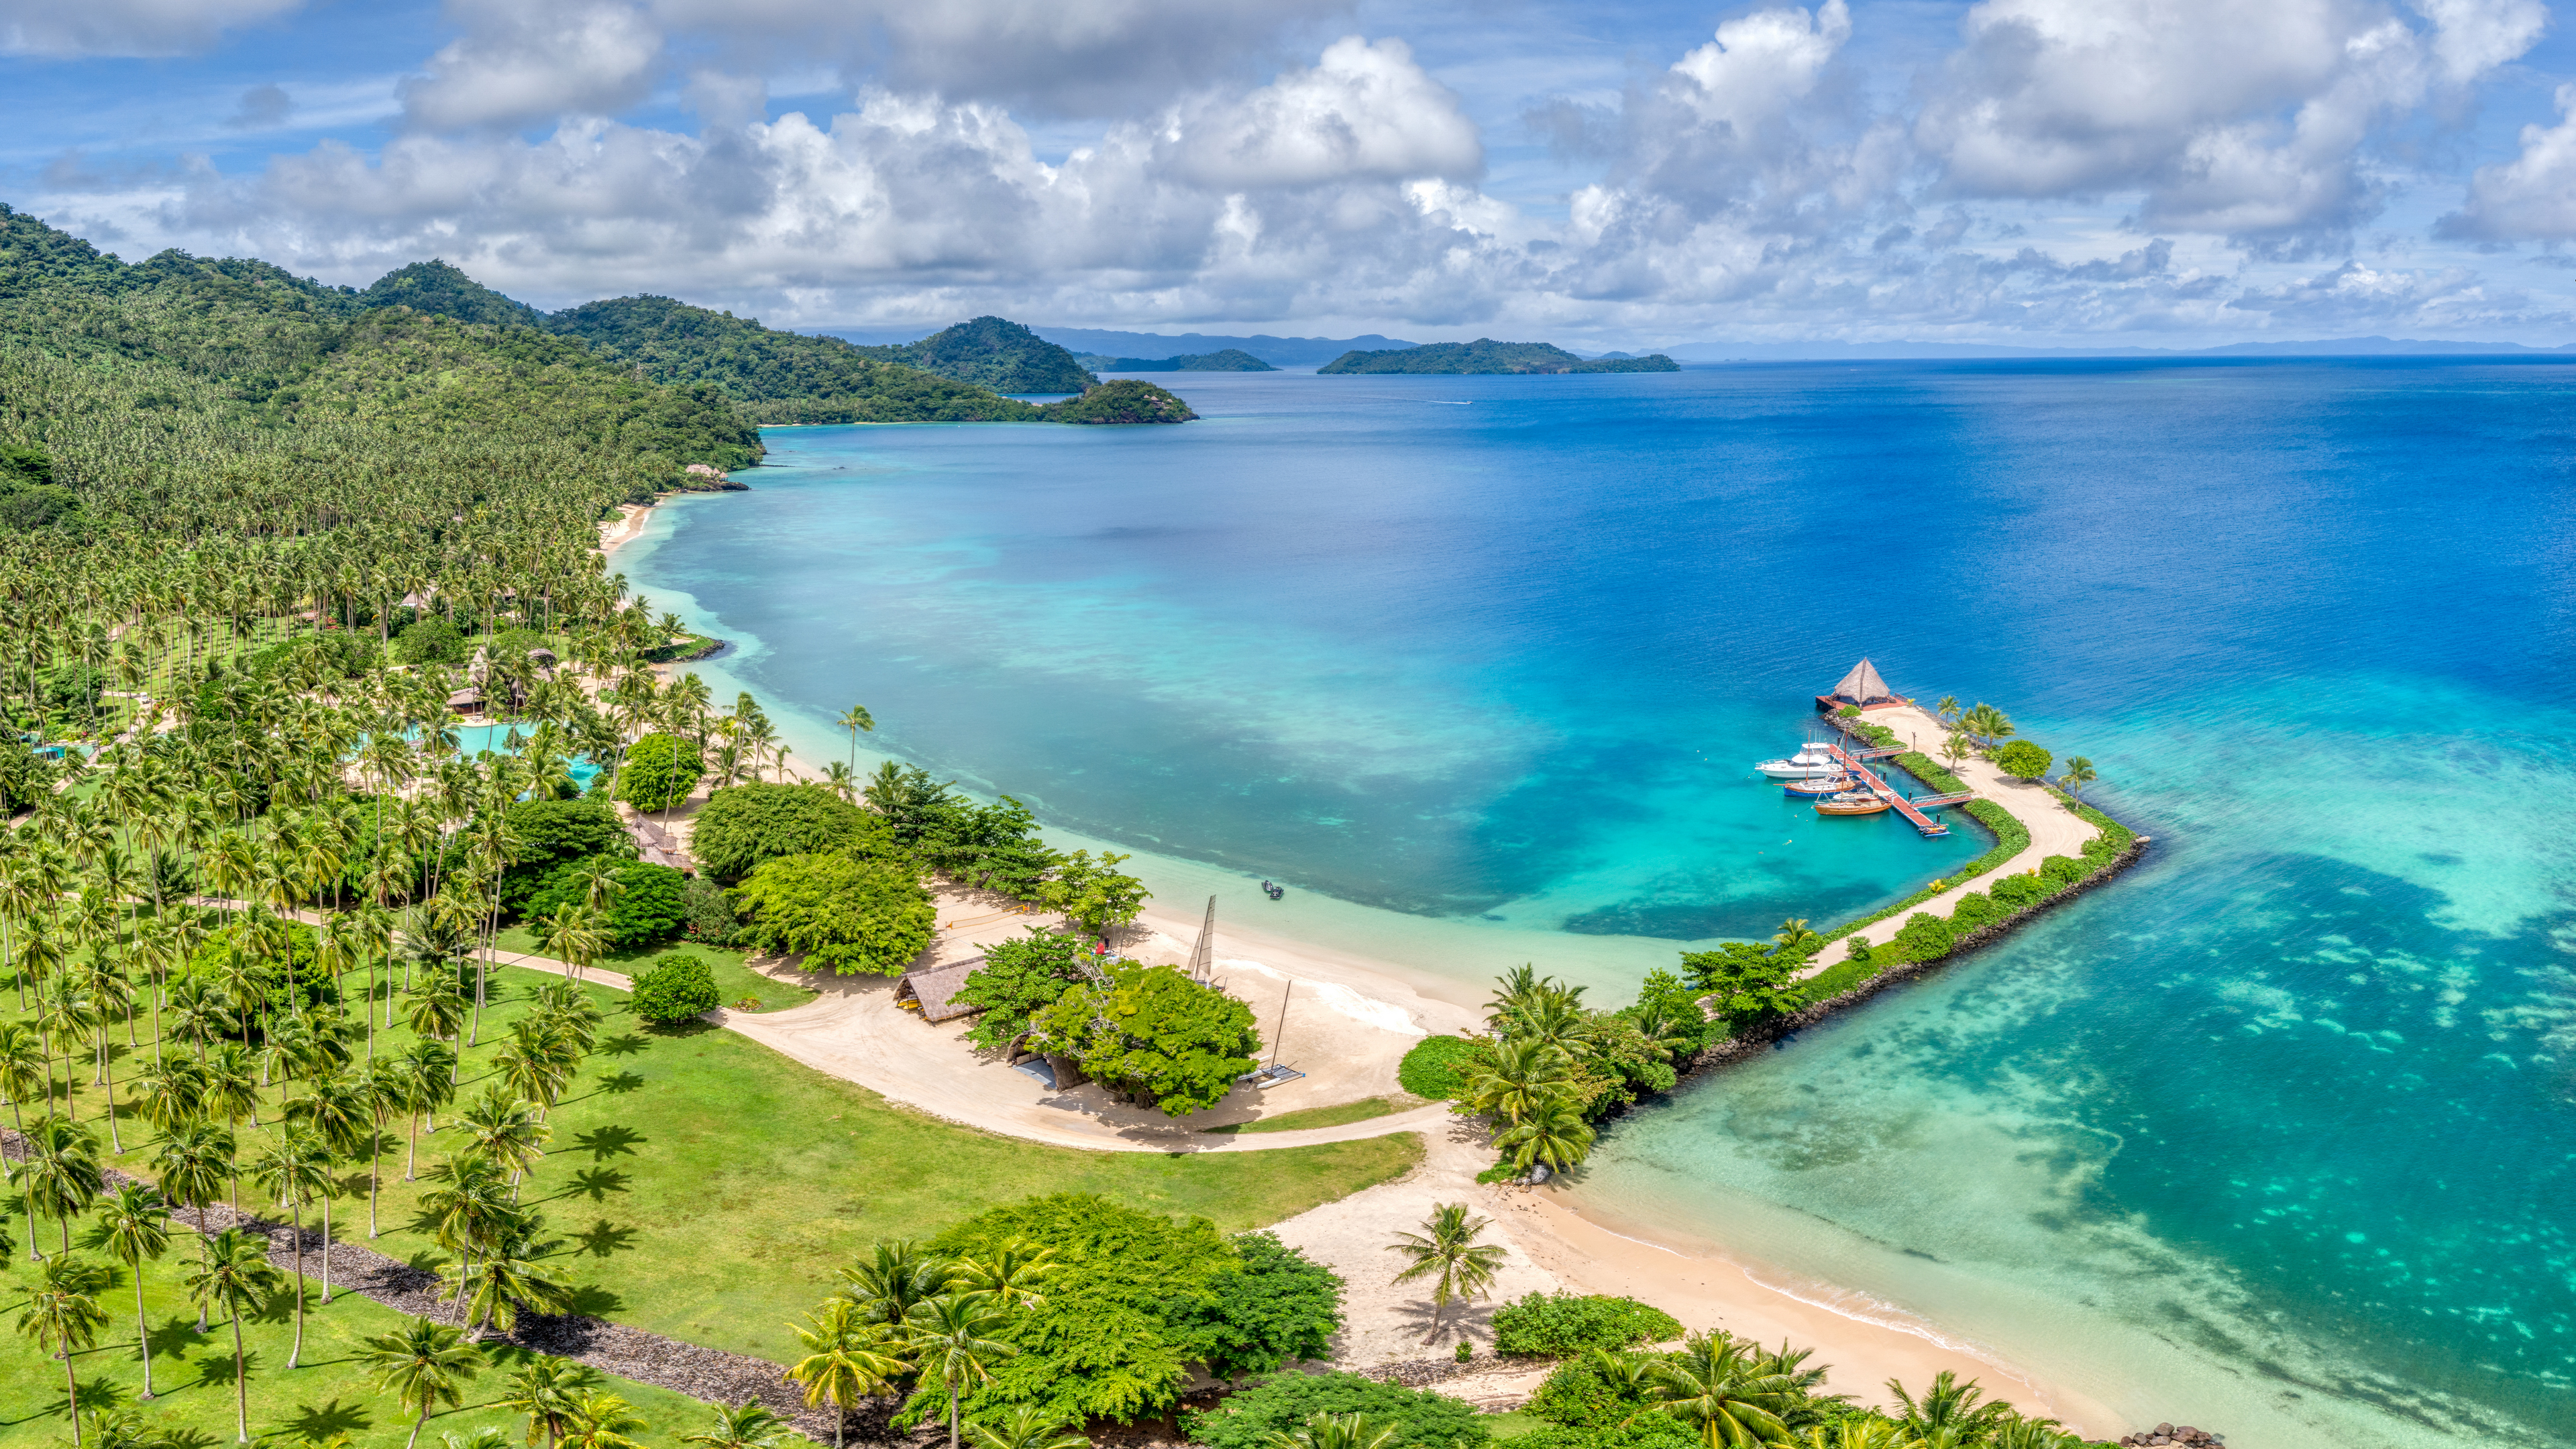 General 3840x2160 photography Trey Ratcliff landscape Fiji bay beach resort water nature forest palm trees hills dock sky clouds bungalow boat grass sand island 4K